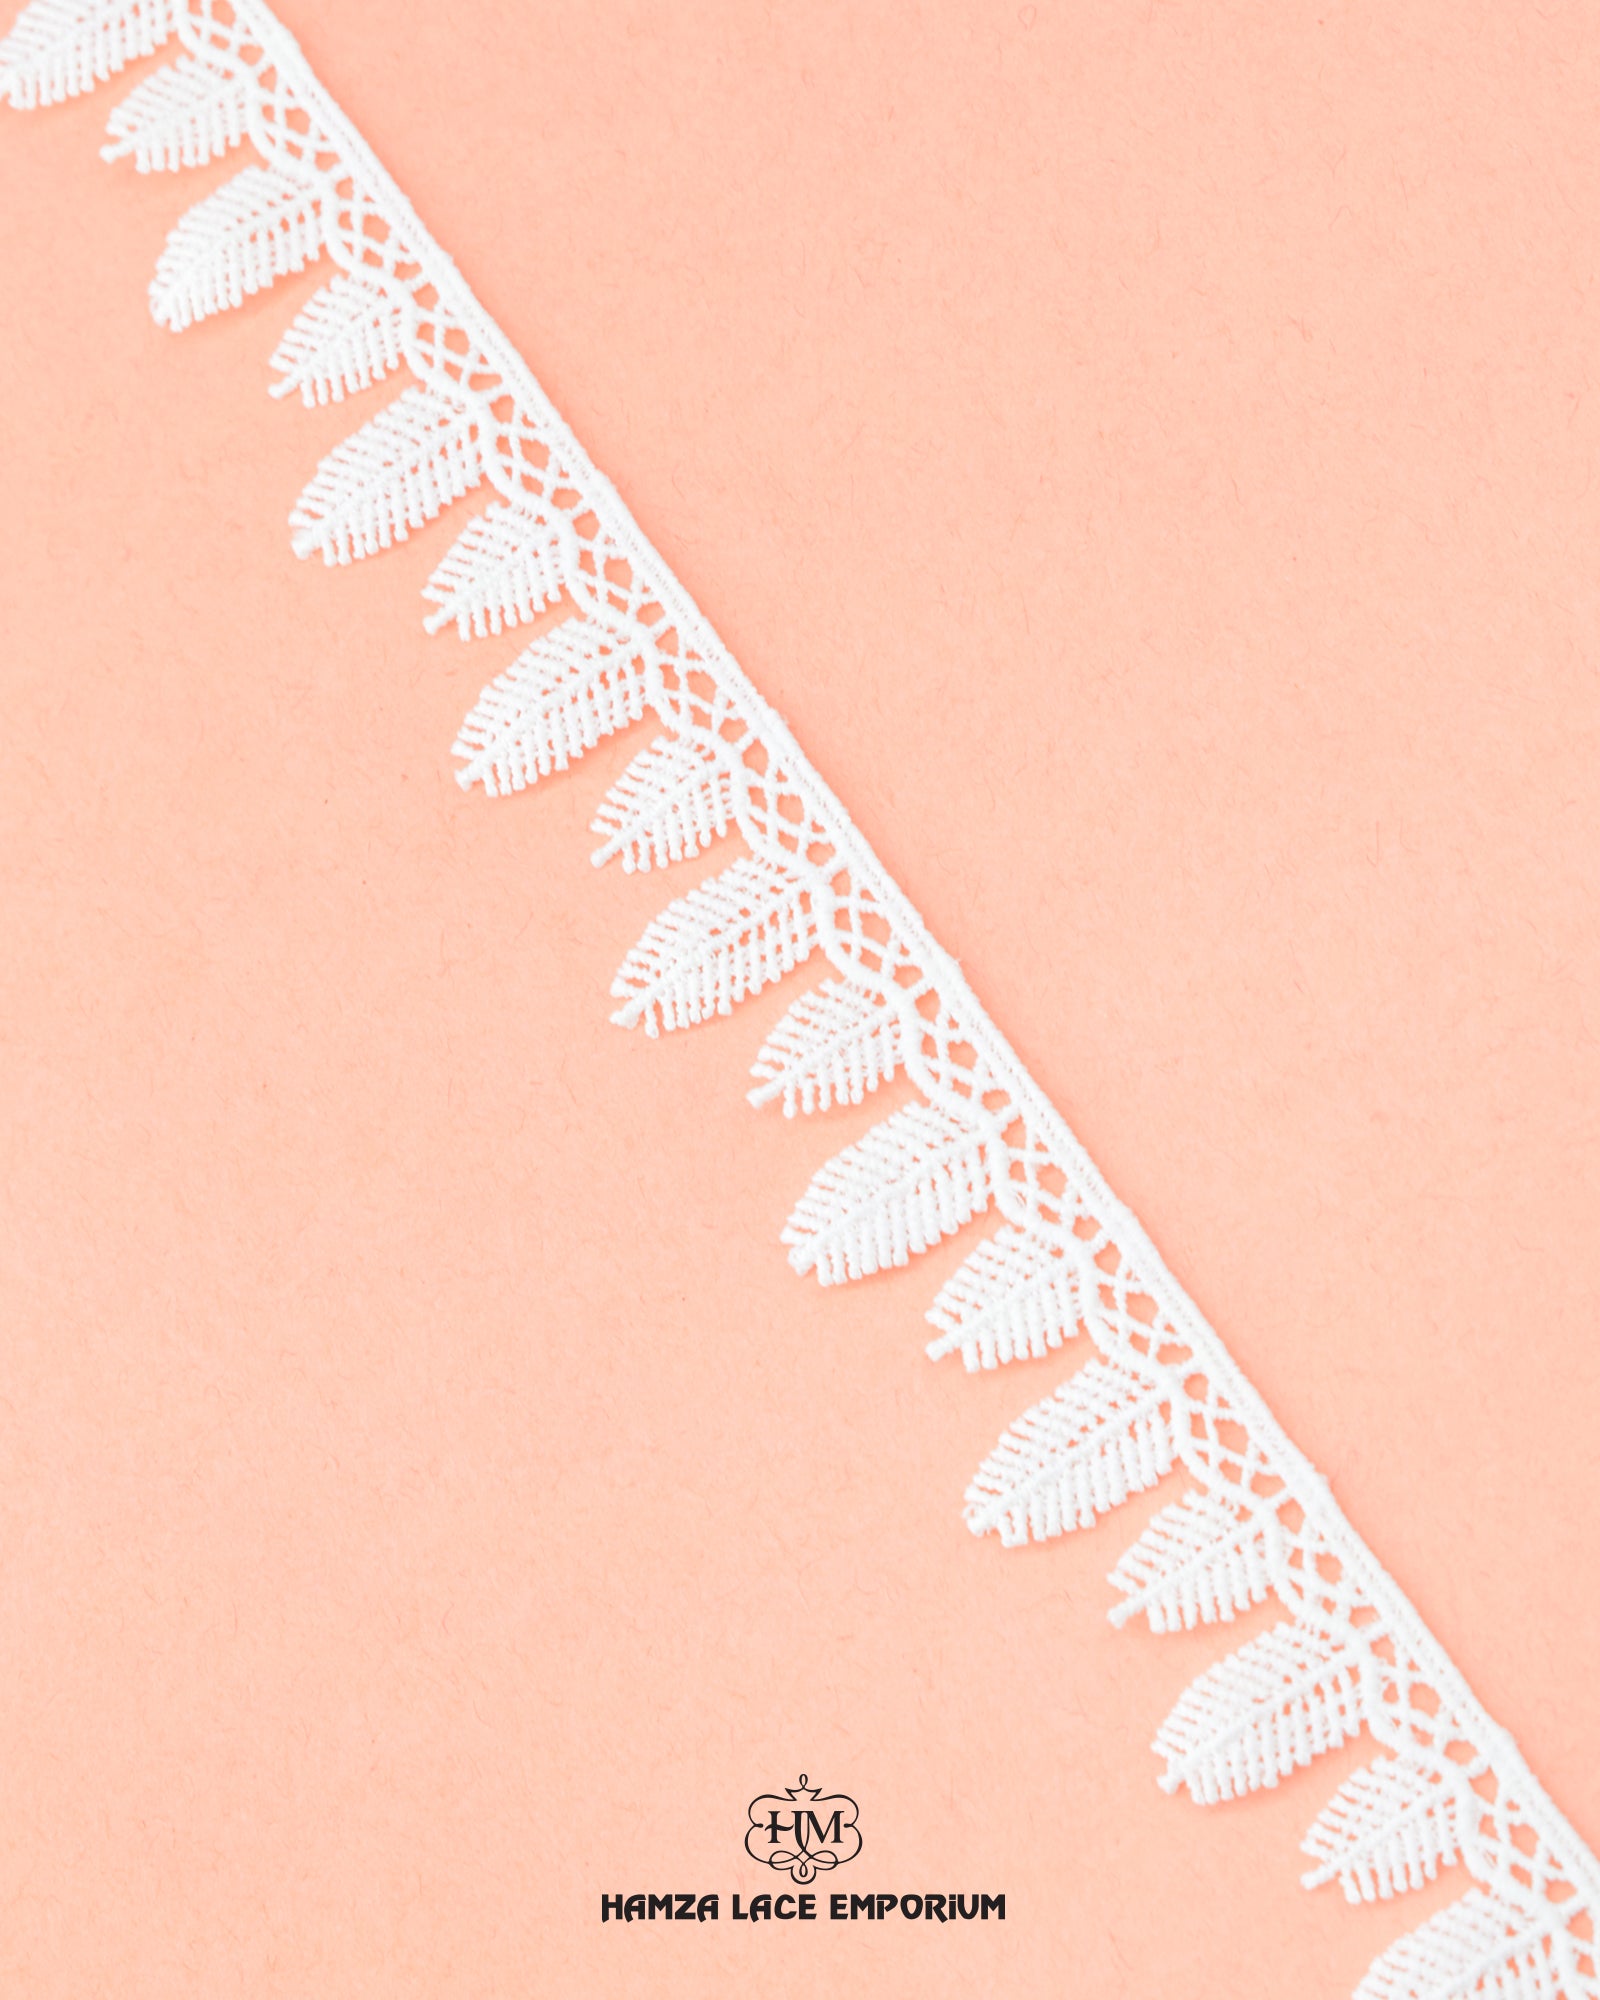 'Edging Leaf Lace 2923' with the 'Hamza Lace' sign